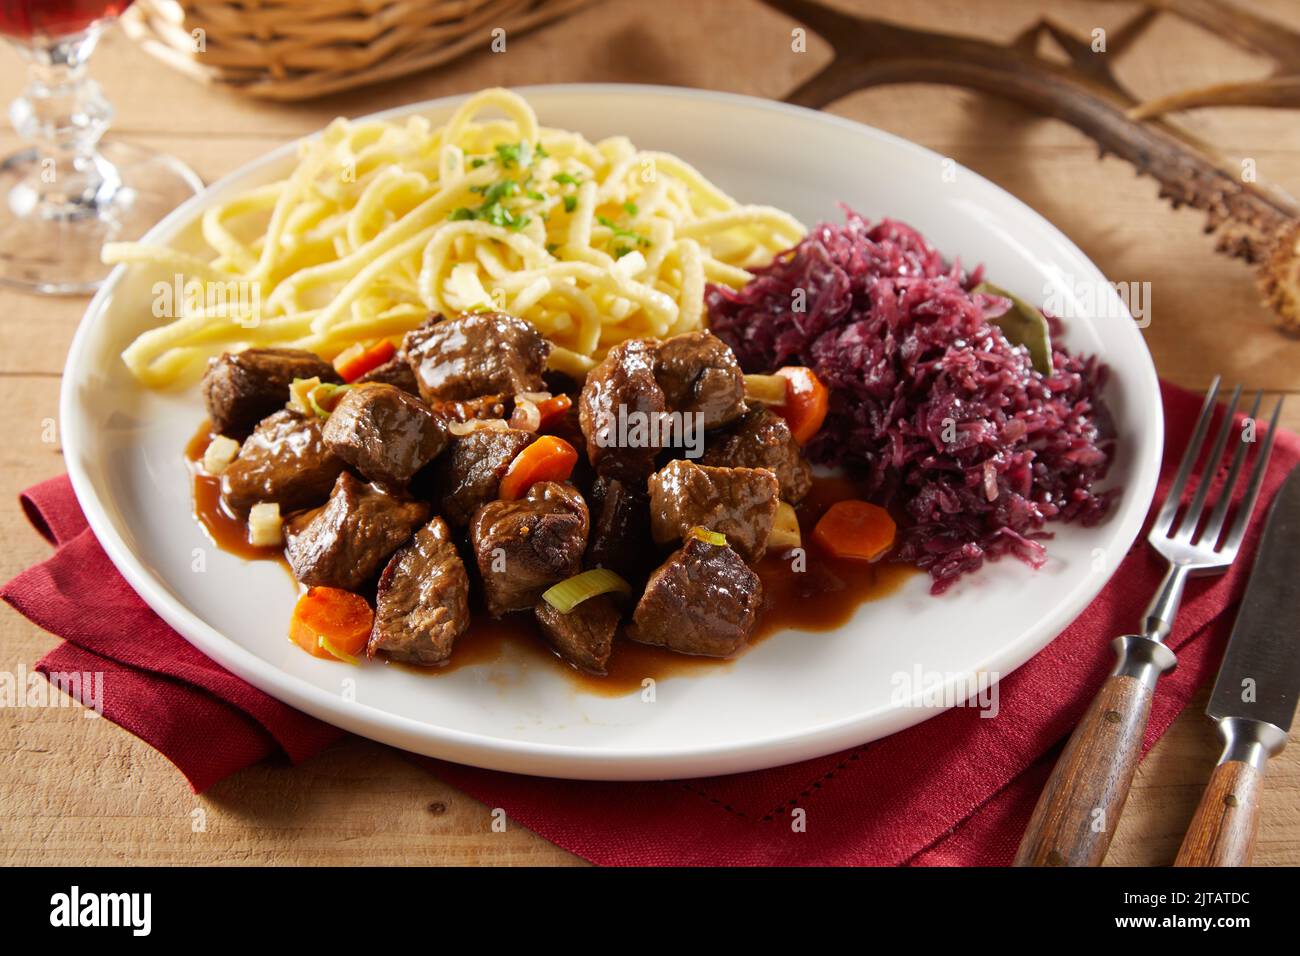 From above meat goulash with spatzle pasta and sauerkraut served on plate near fork and knife during lunch Stock Photo